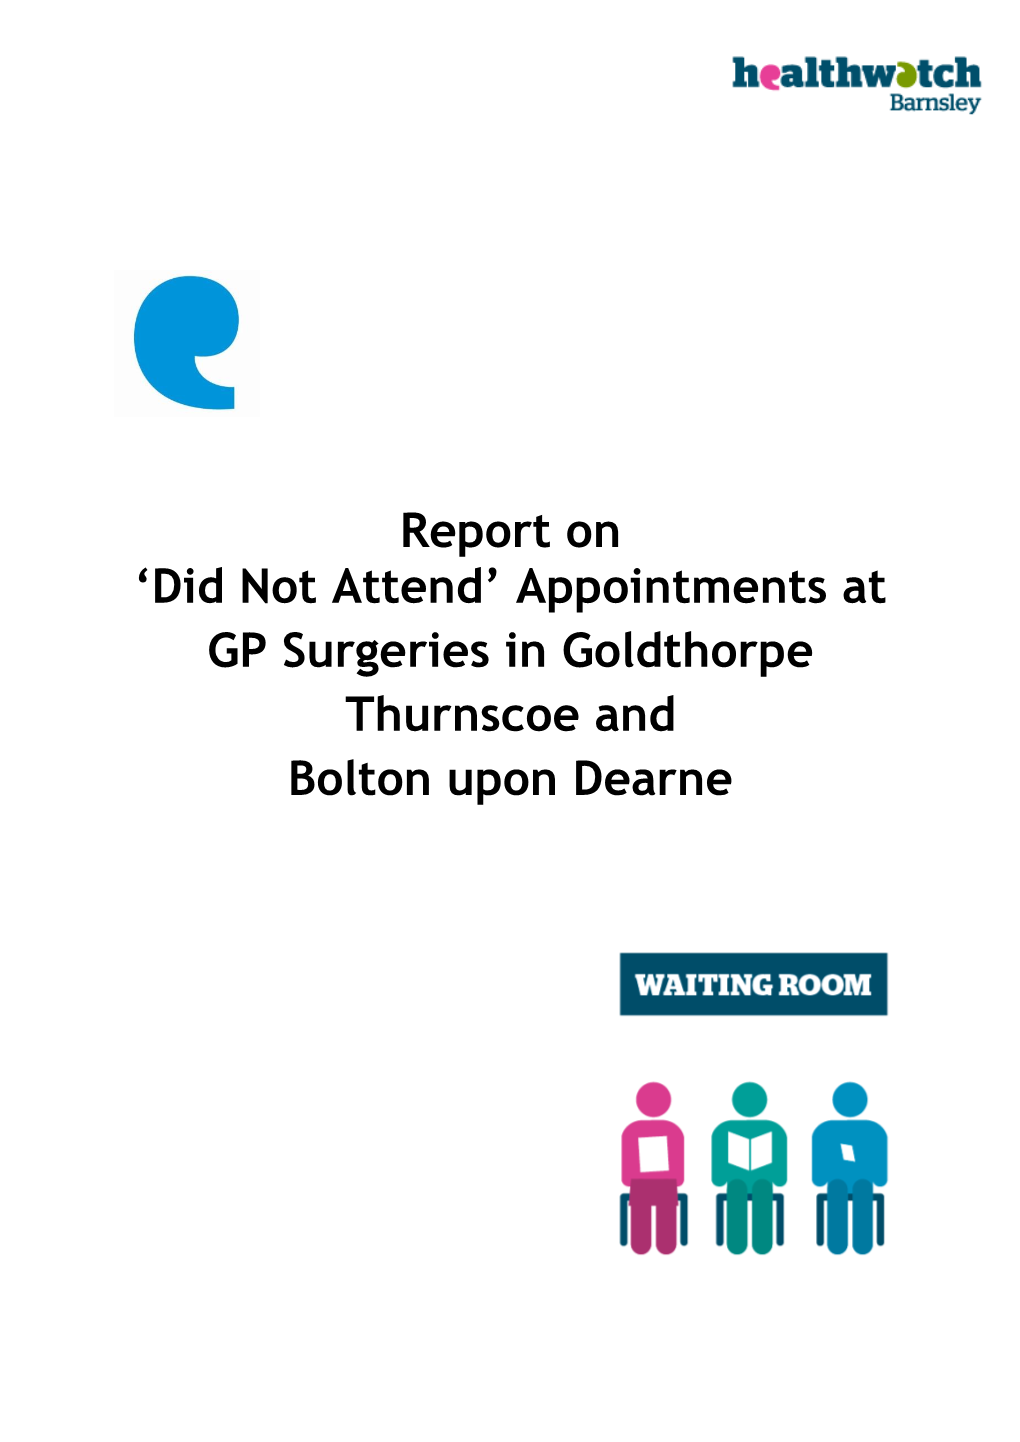 Report on 'Did Not Attend' Appointments at GP Surgeries In